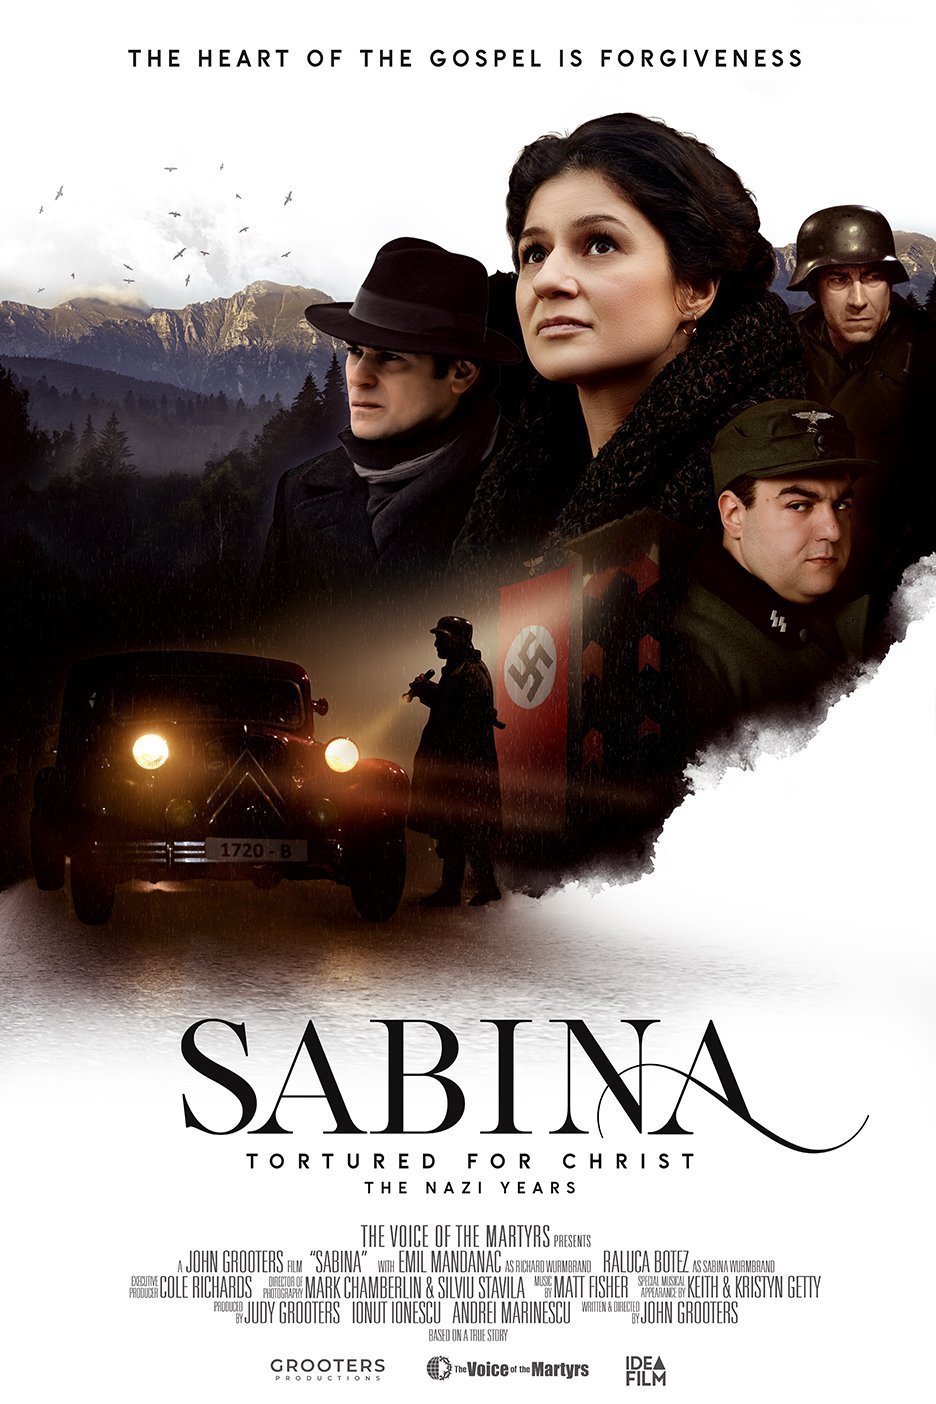 Poster of the movie Sabina: Tortured for Christ, the Nazi Years